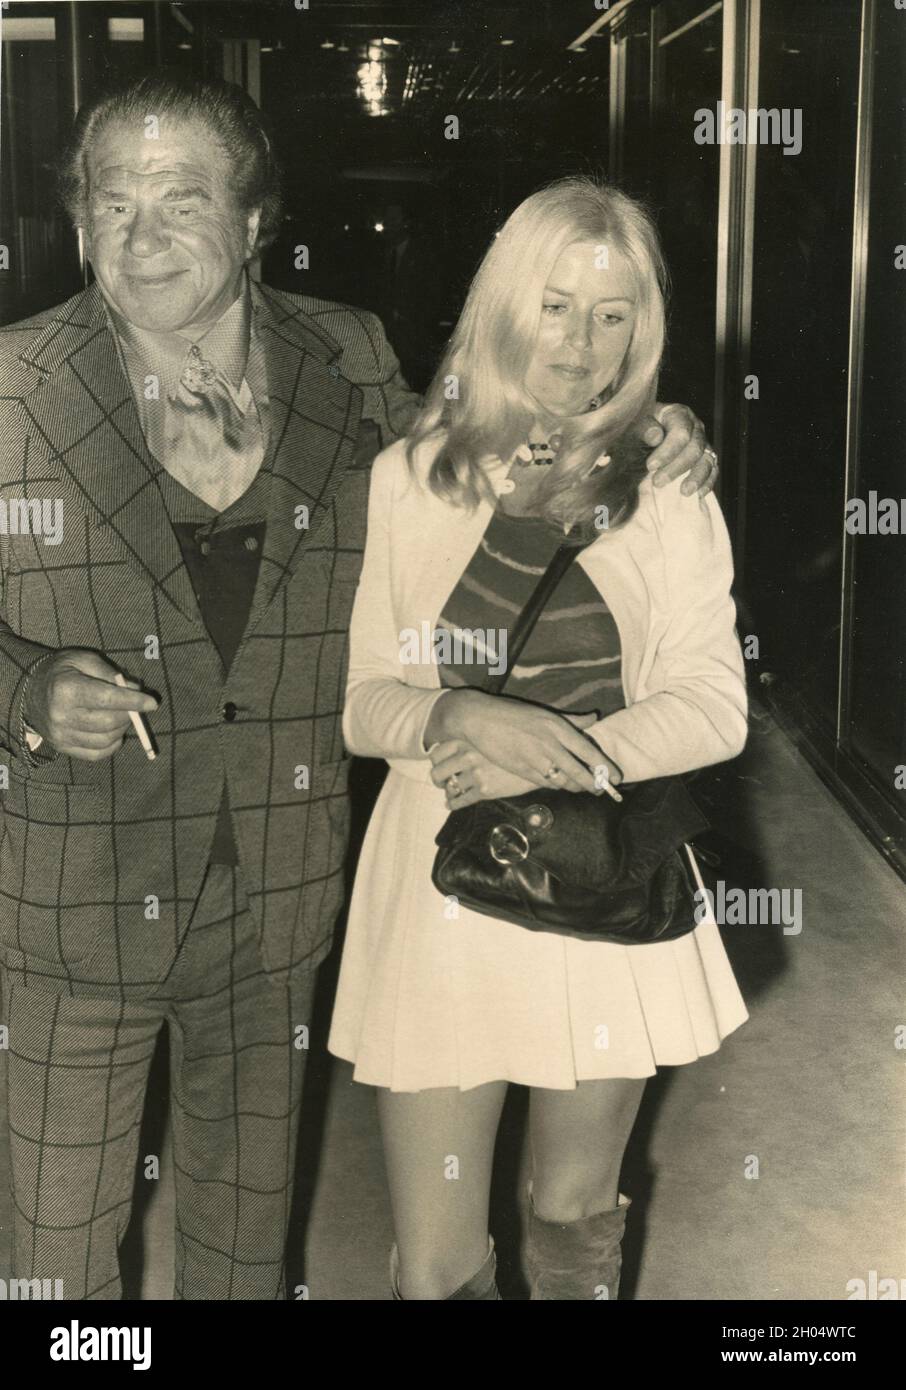 American film and stage actor Lionel Stander and wife Stephanie, 1970s Stock Photo